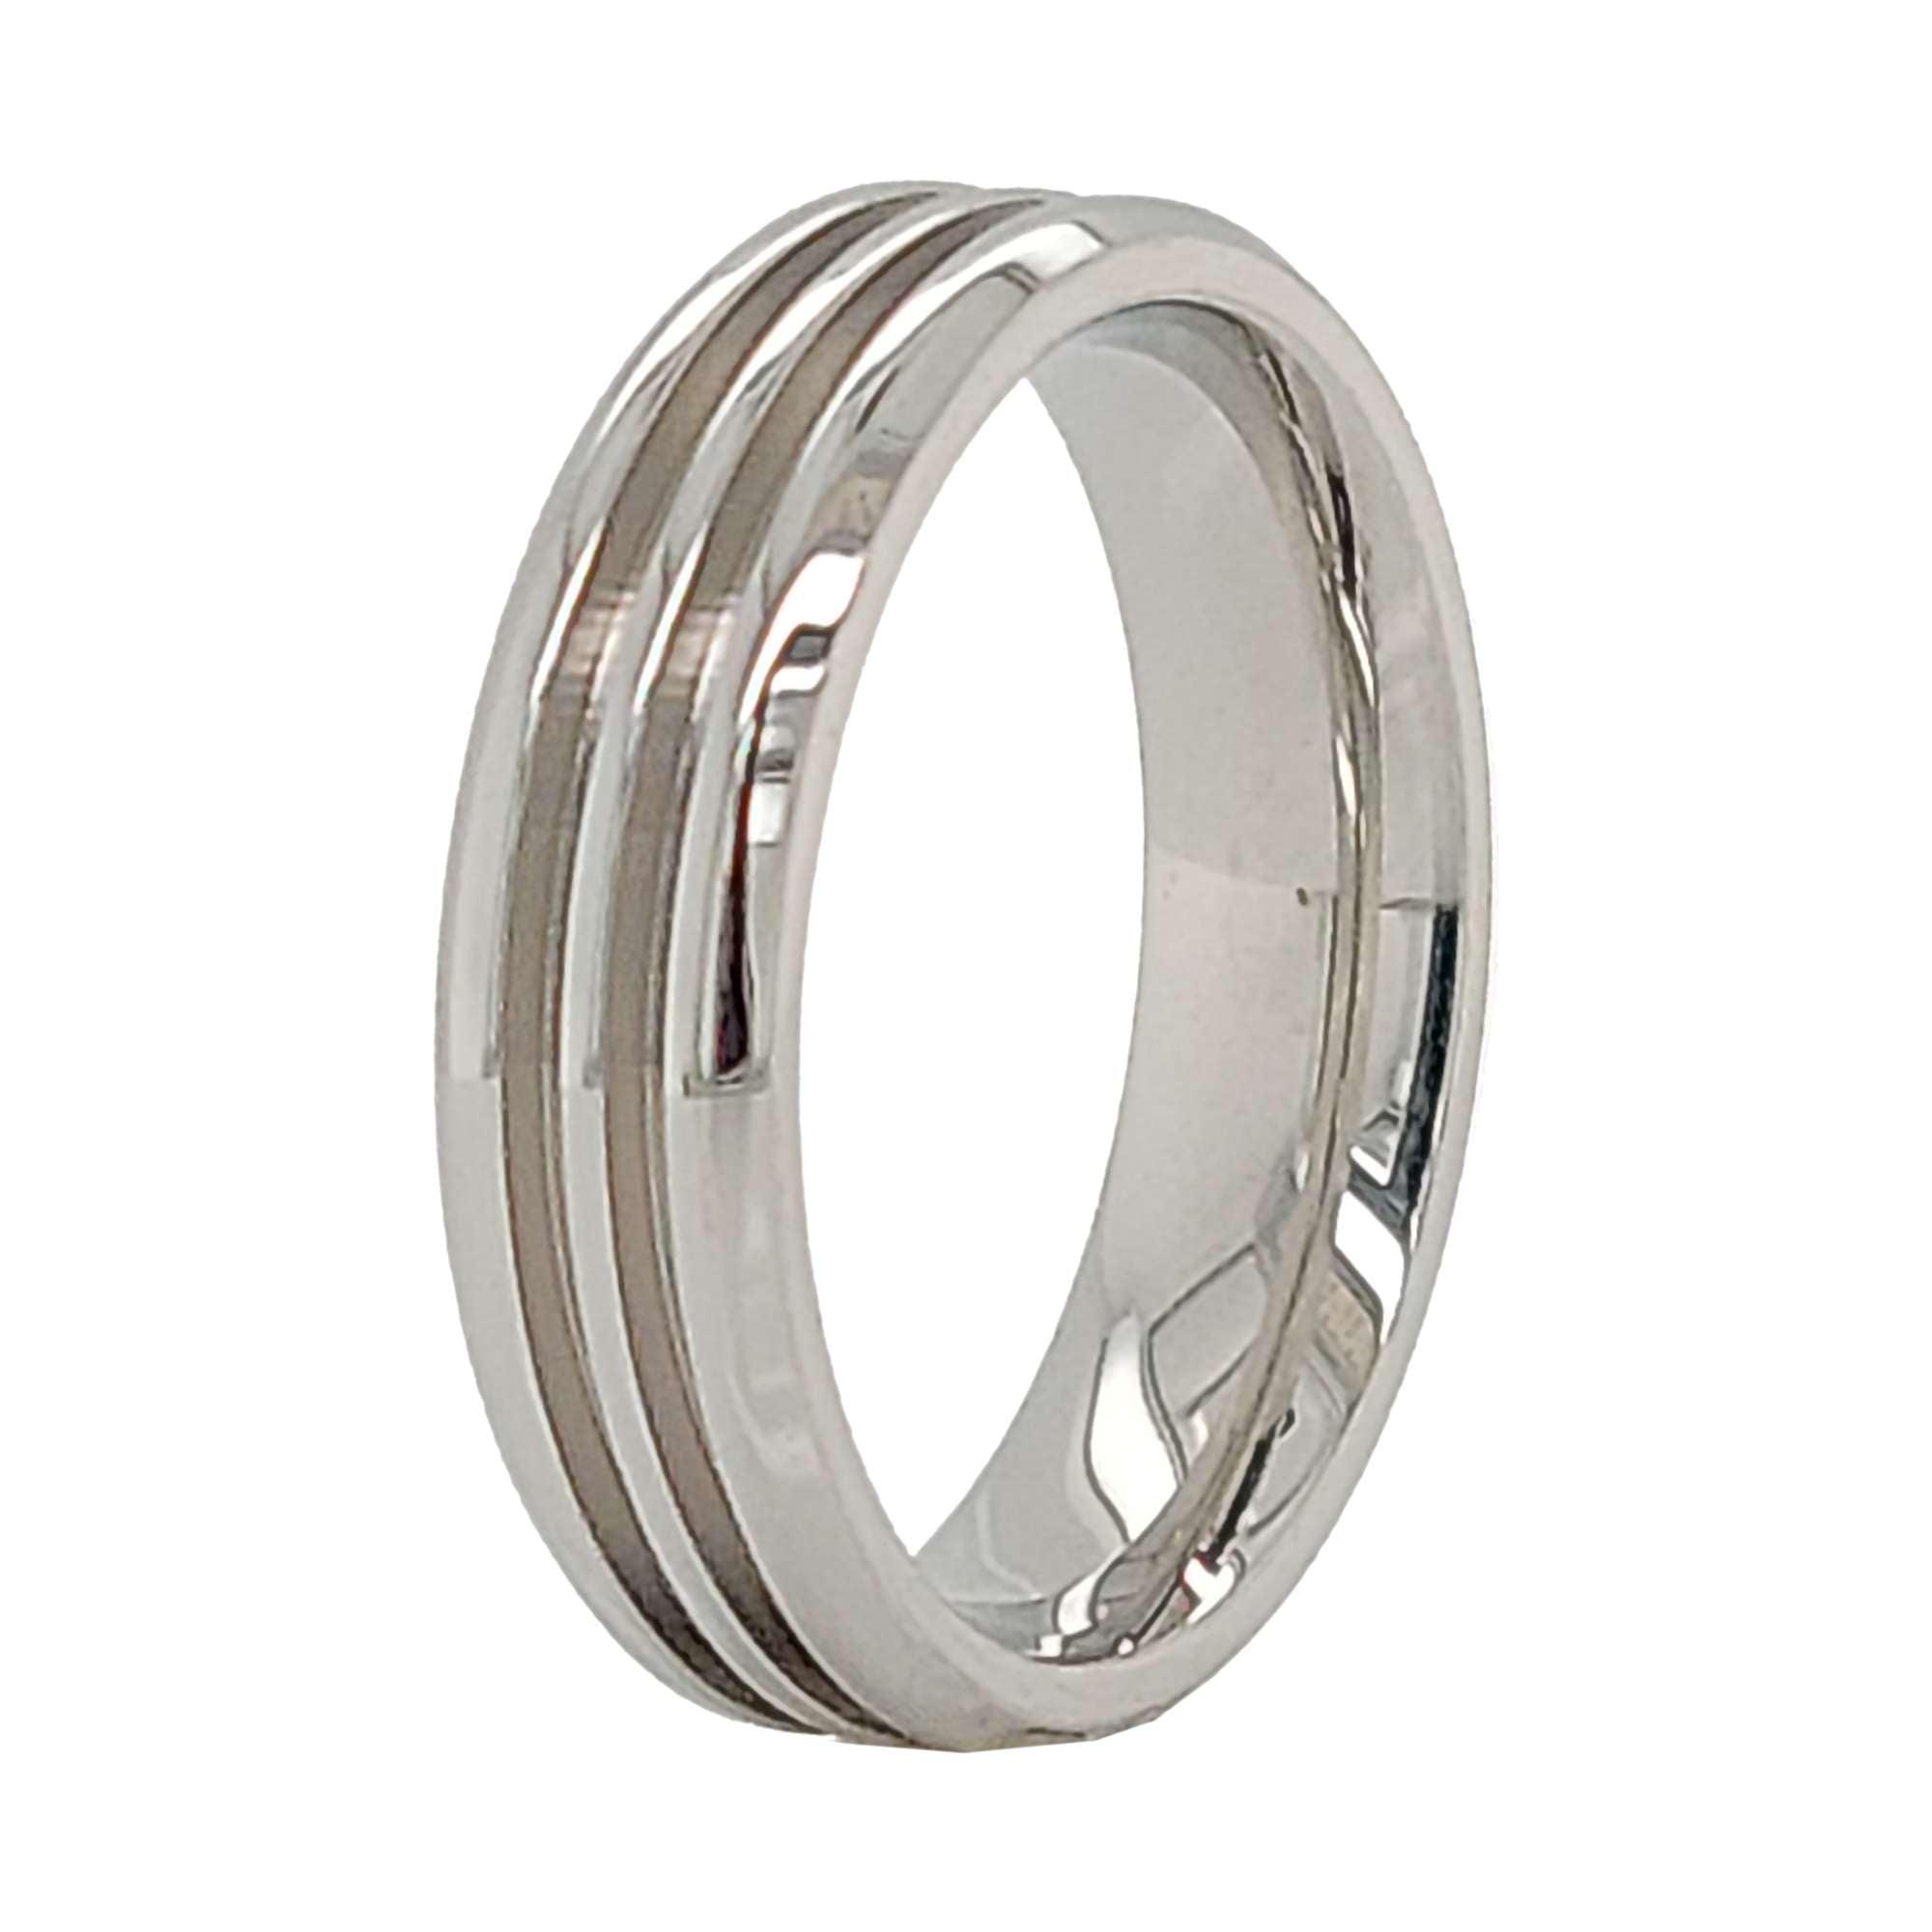 Titanium Ring Blank - 8mm Wide 4mm Channel - Ring for Jewelry